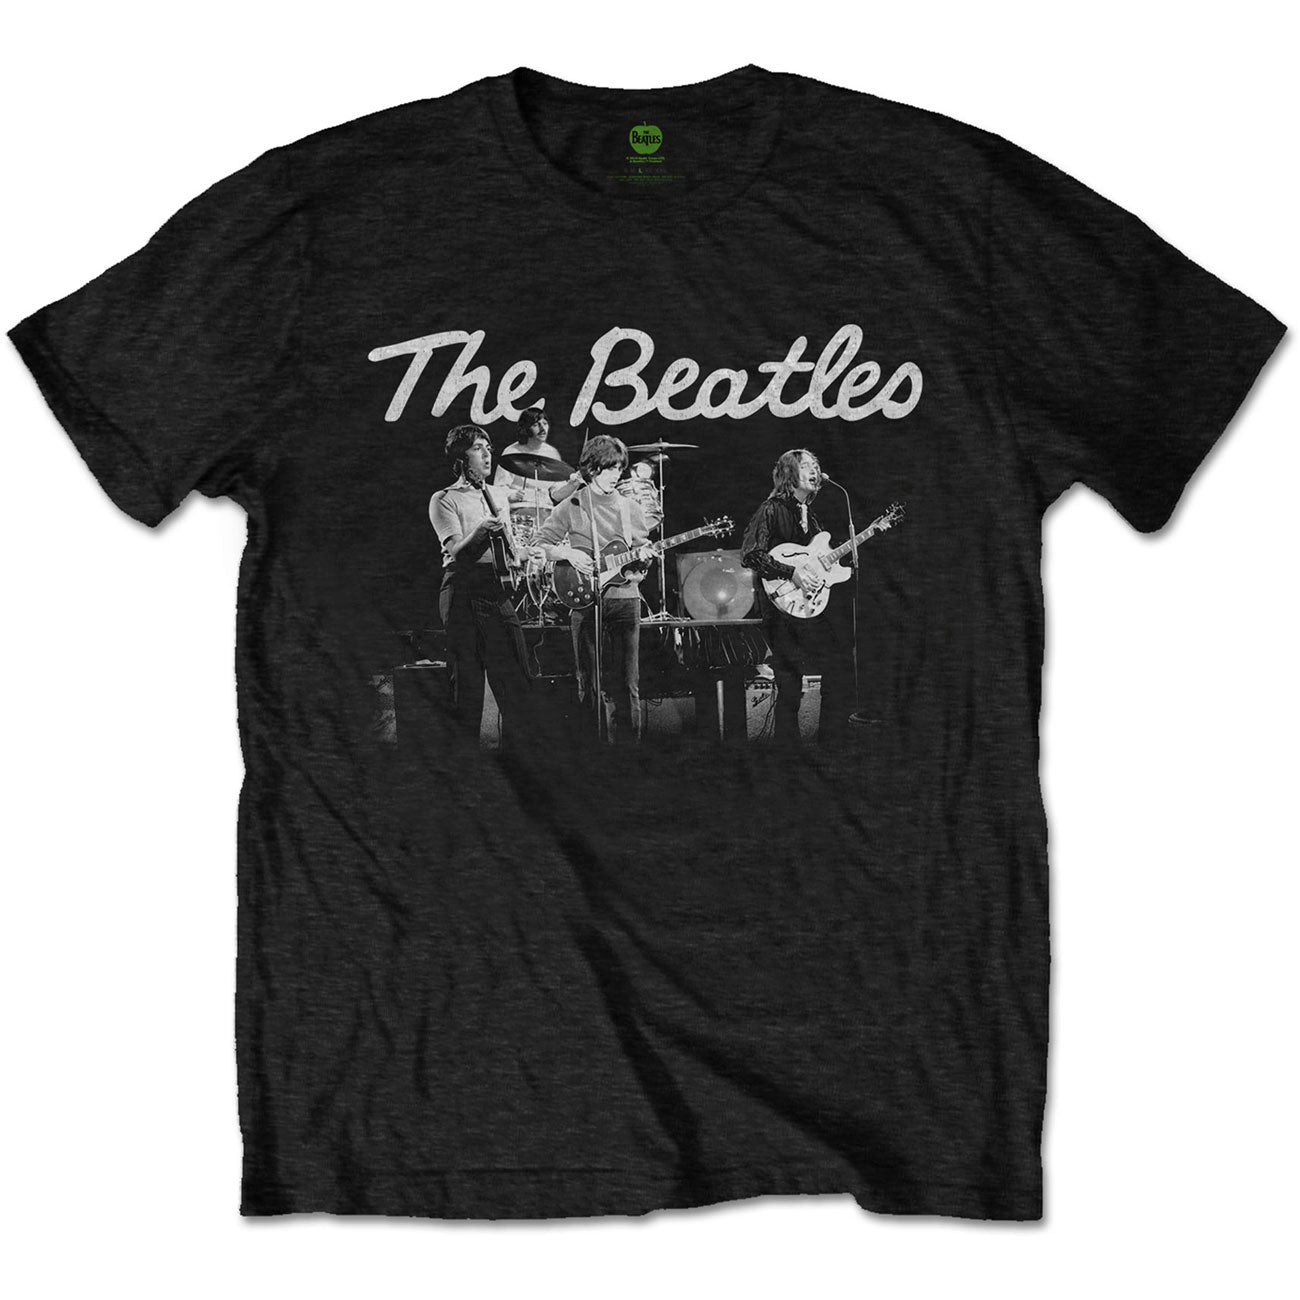 The Beatles Official T-Shirt 1968 Live Photo